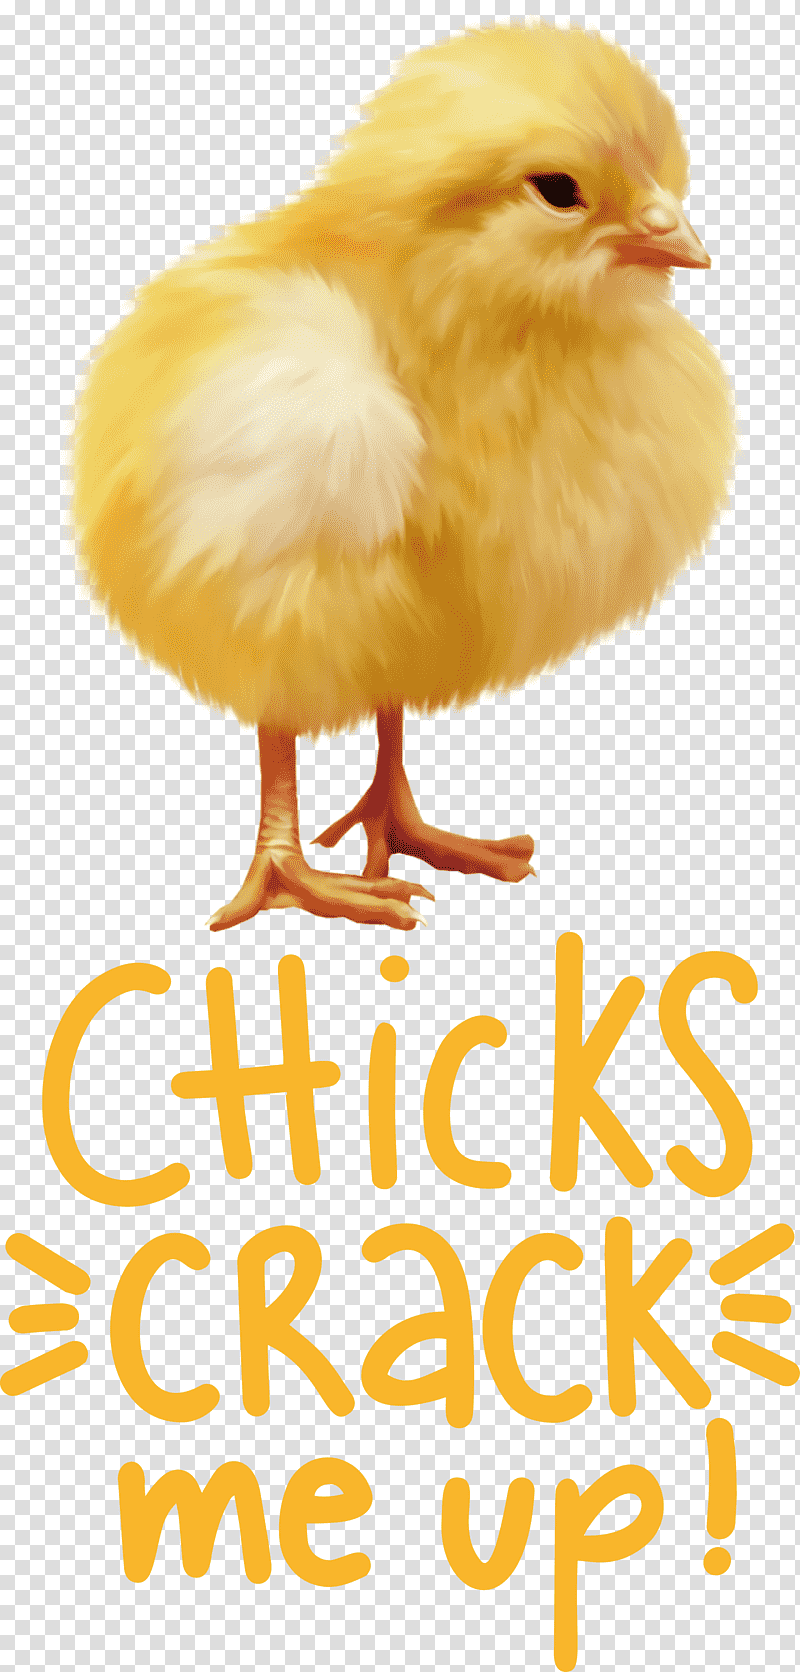 Chicks Crack Me Up Easter Day Happy Easter, Chicken, Landfowl, Poultry, Live, Yellow, Beak transparent background PNG clipart